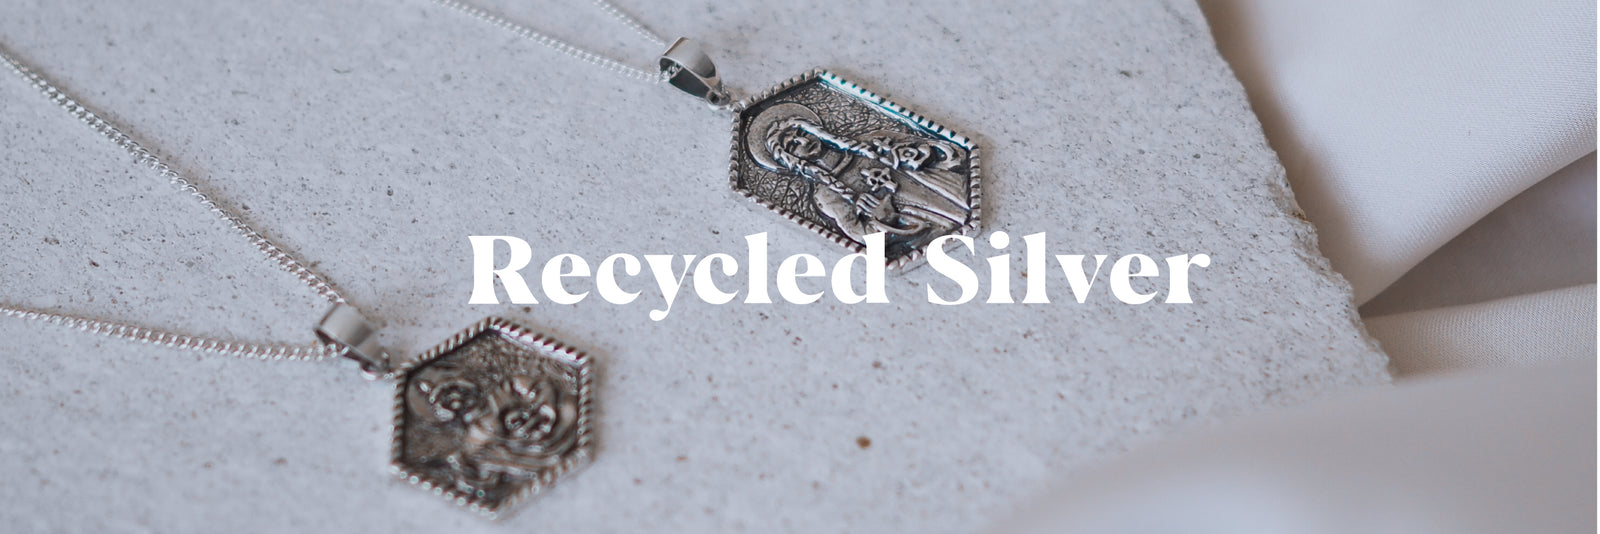 Recycled Metals From Electronic Waste Used to Make Jewelry - The New York  Times